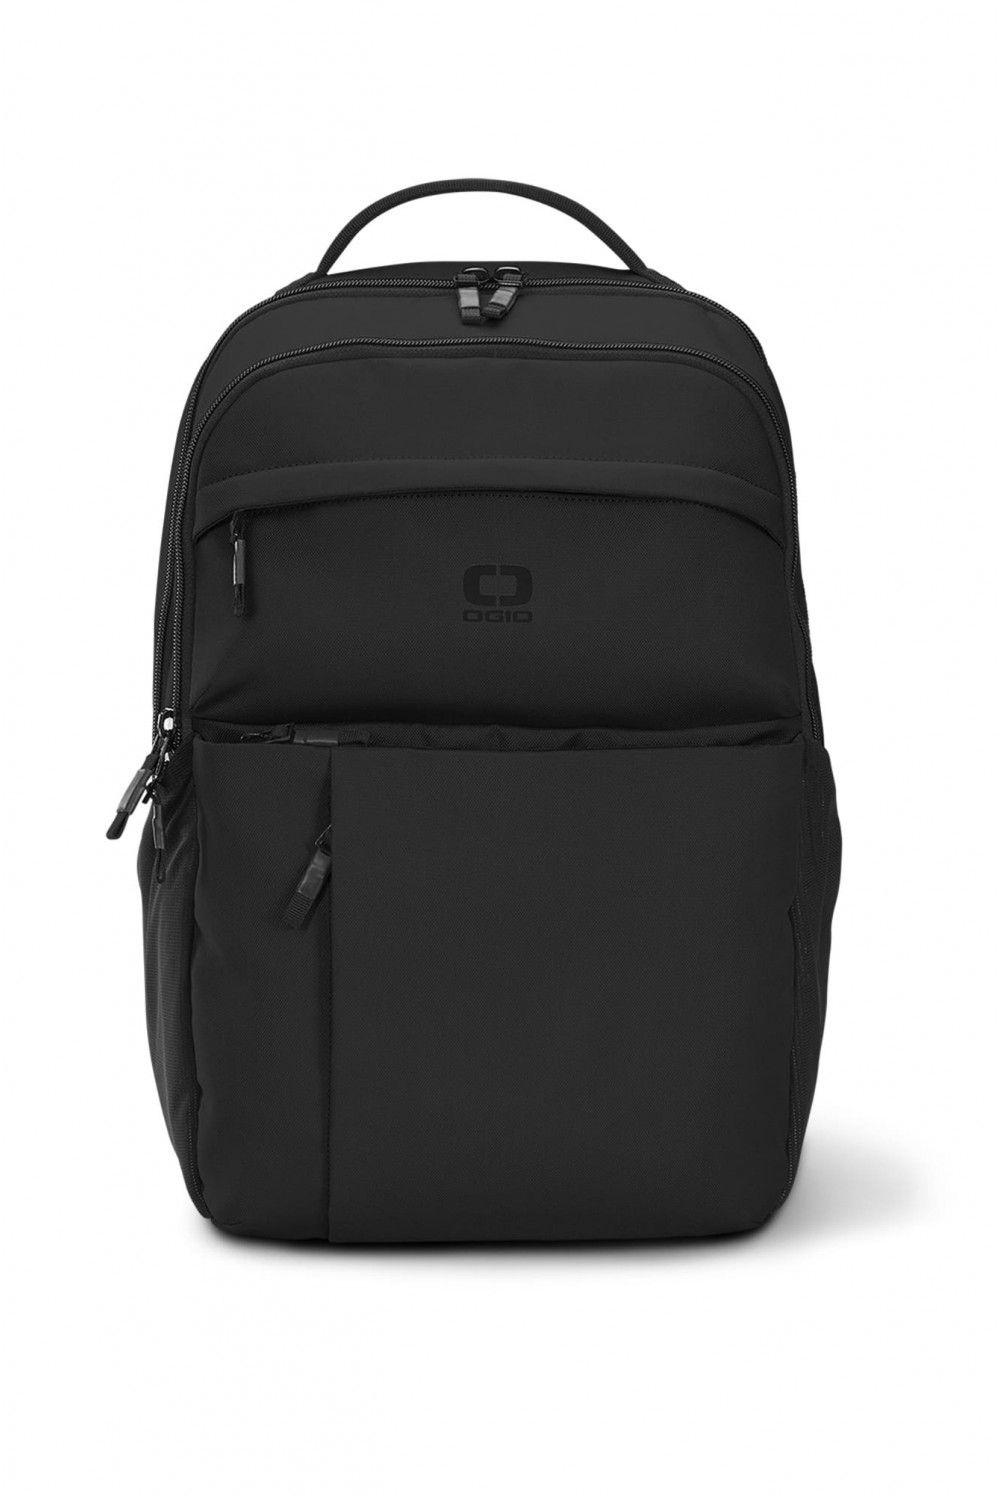 Laptop Backpack OGIO Pace 20 liters 17 inches